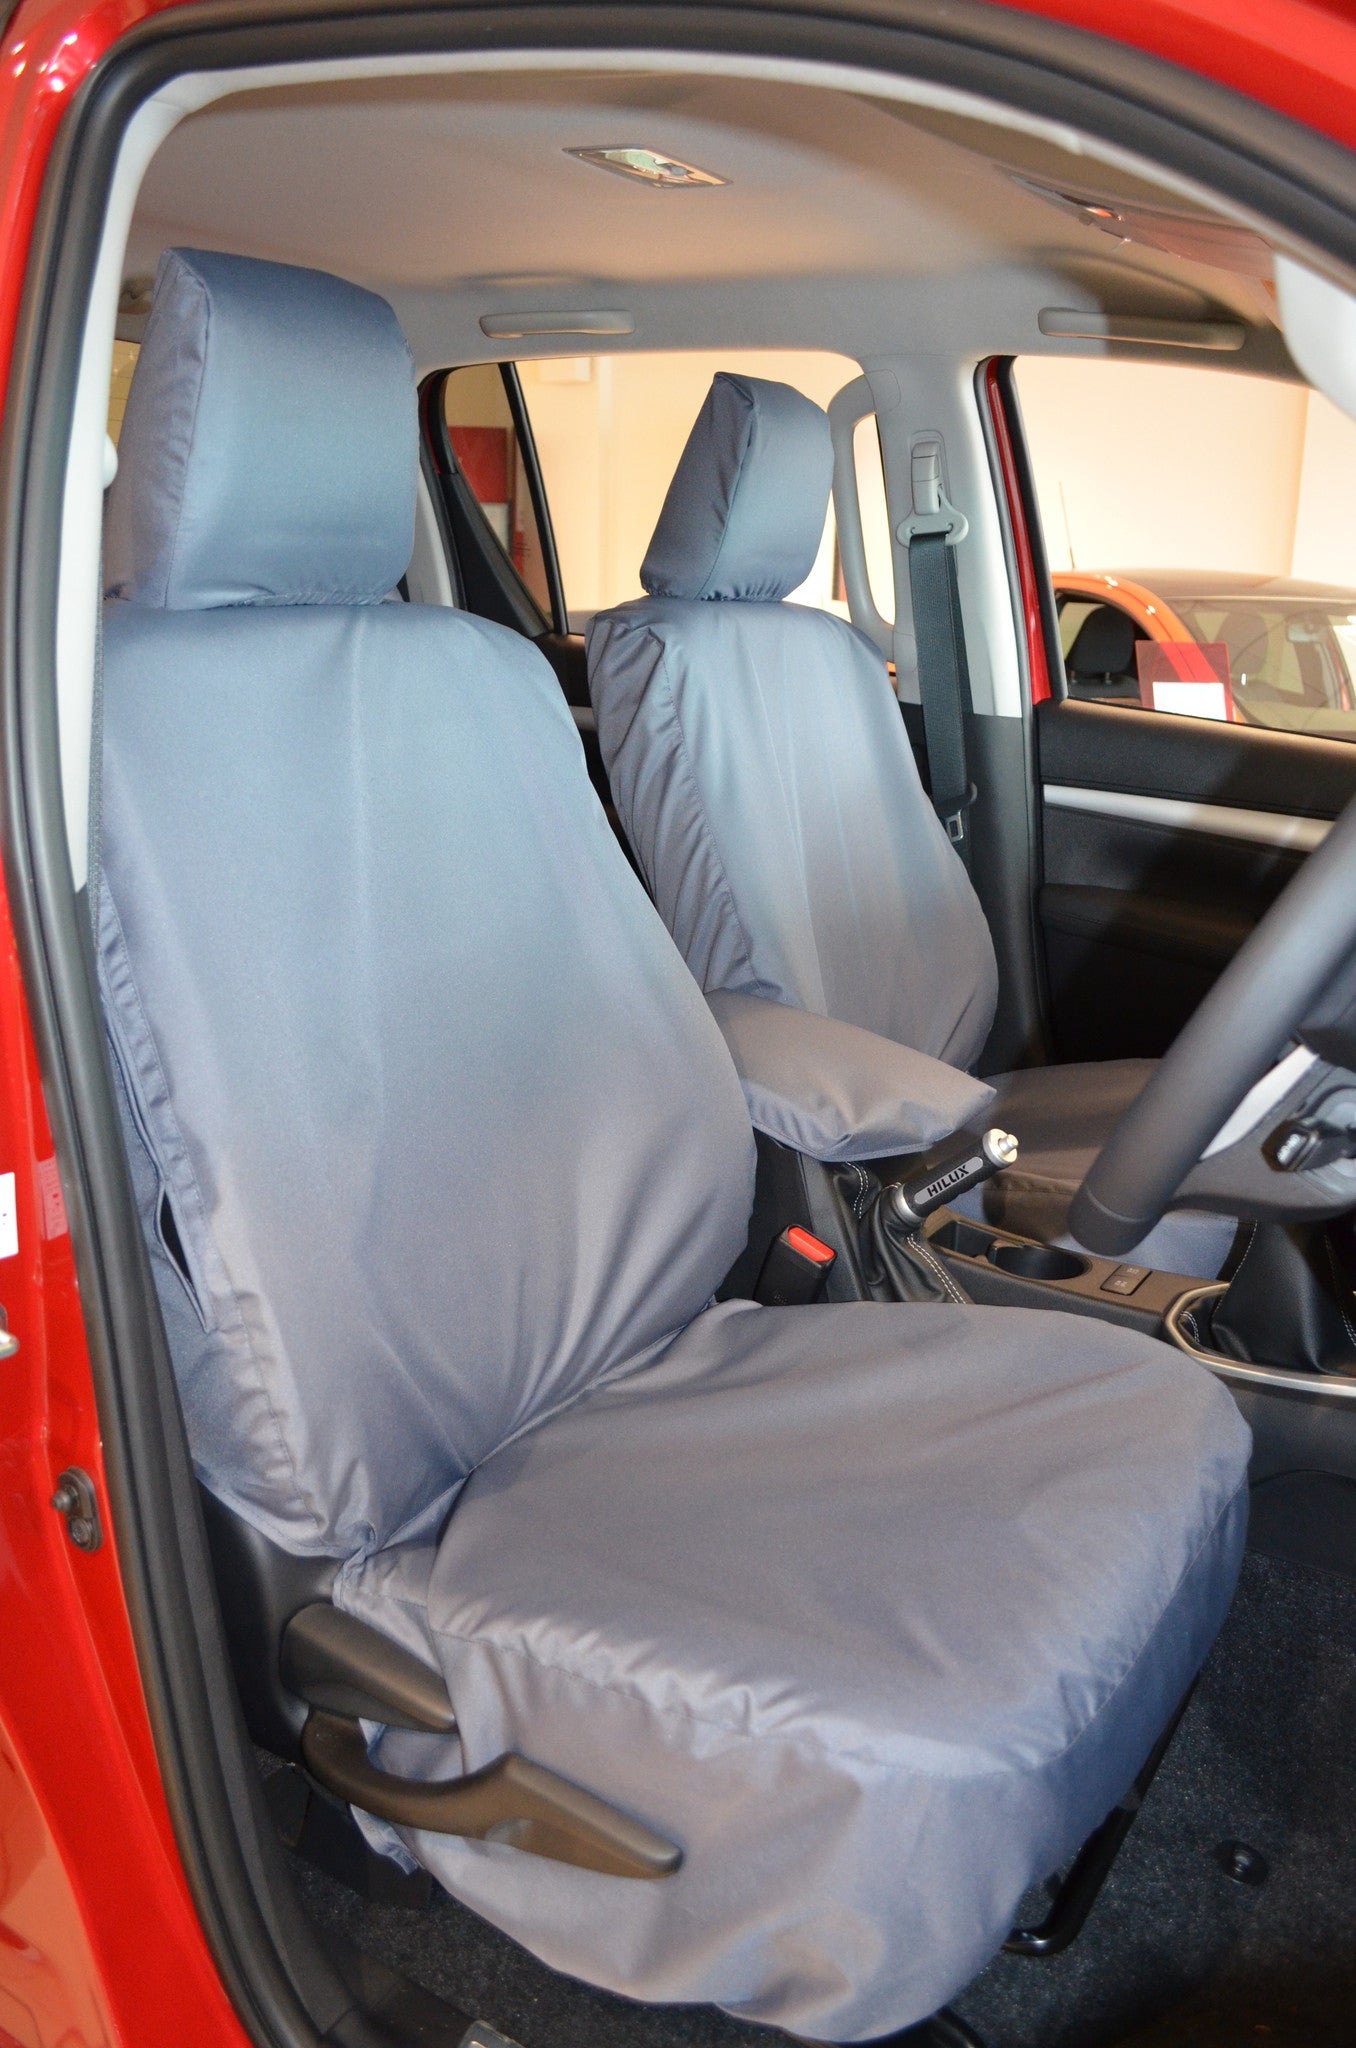 Toyota Waterproof Seat Covers | Tailored Seat Covers